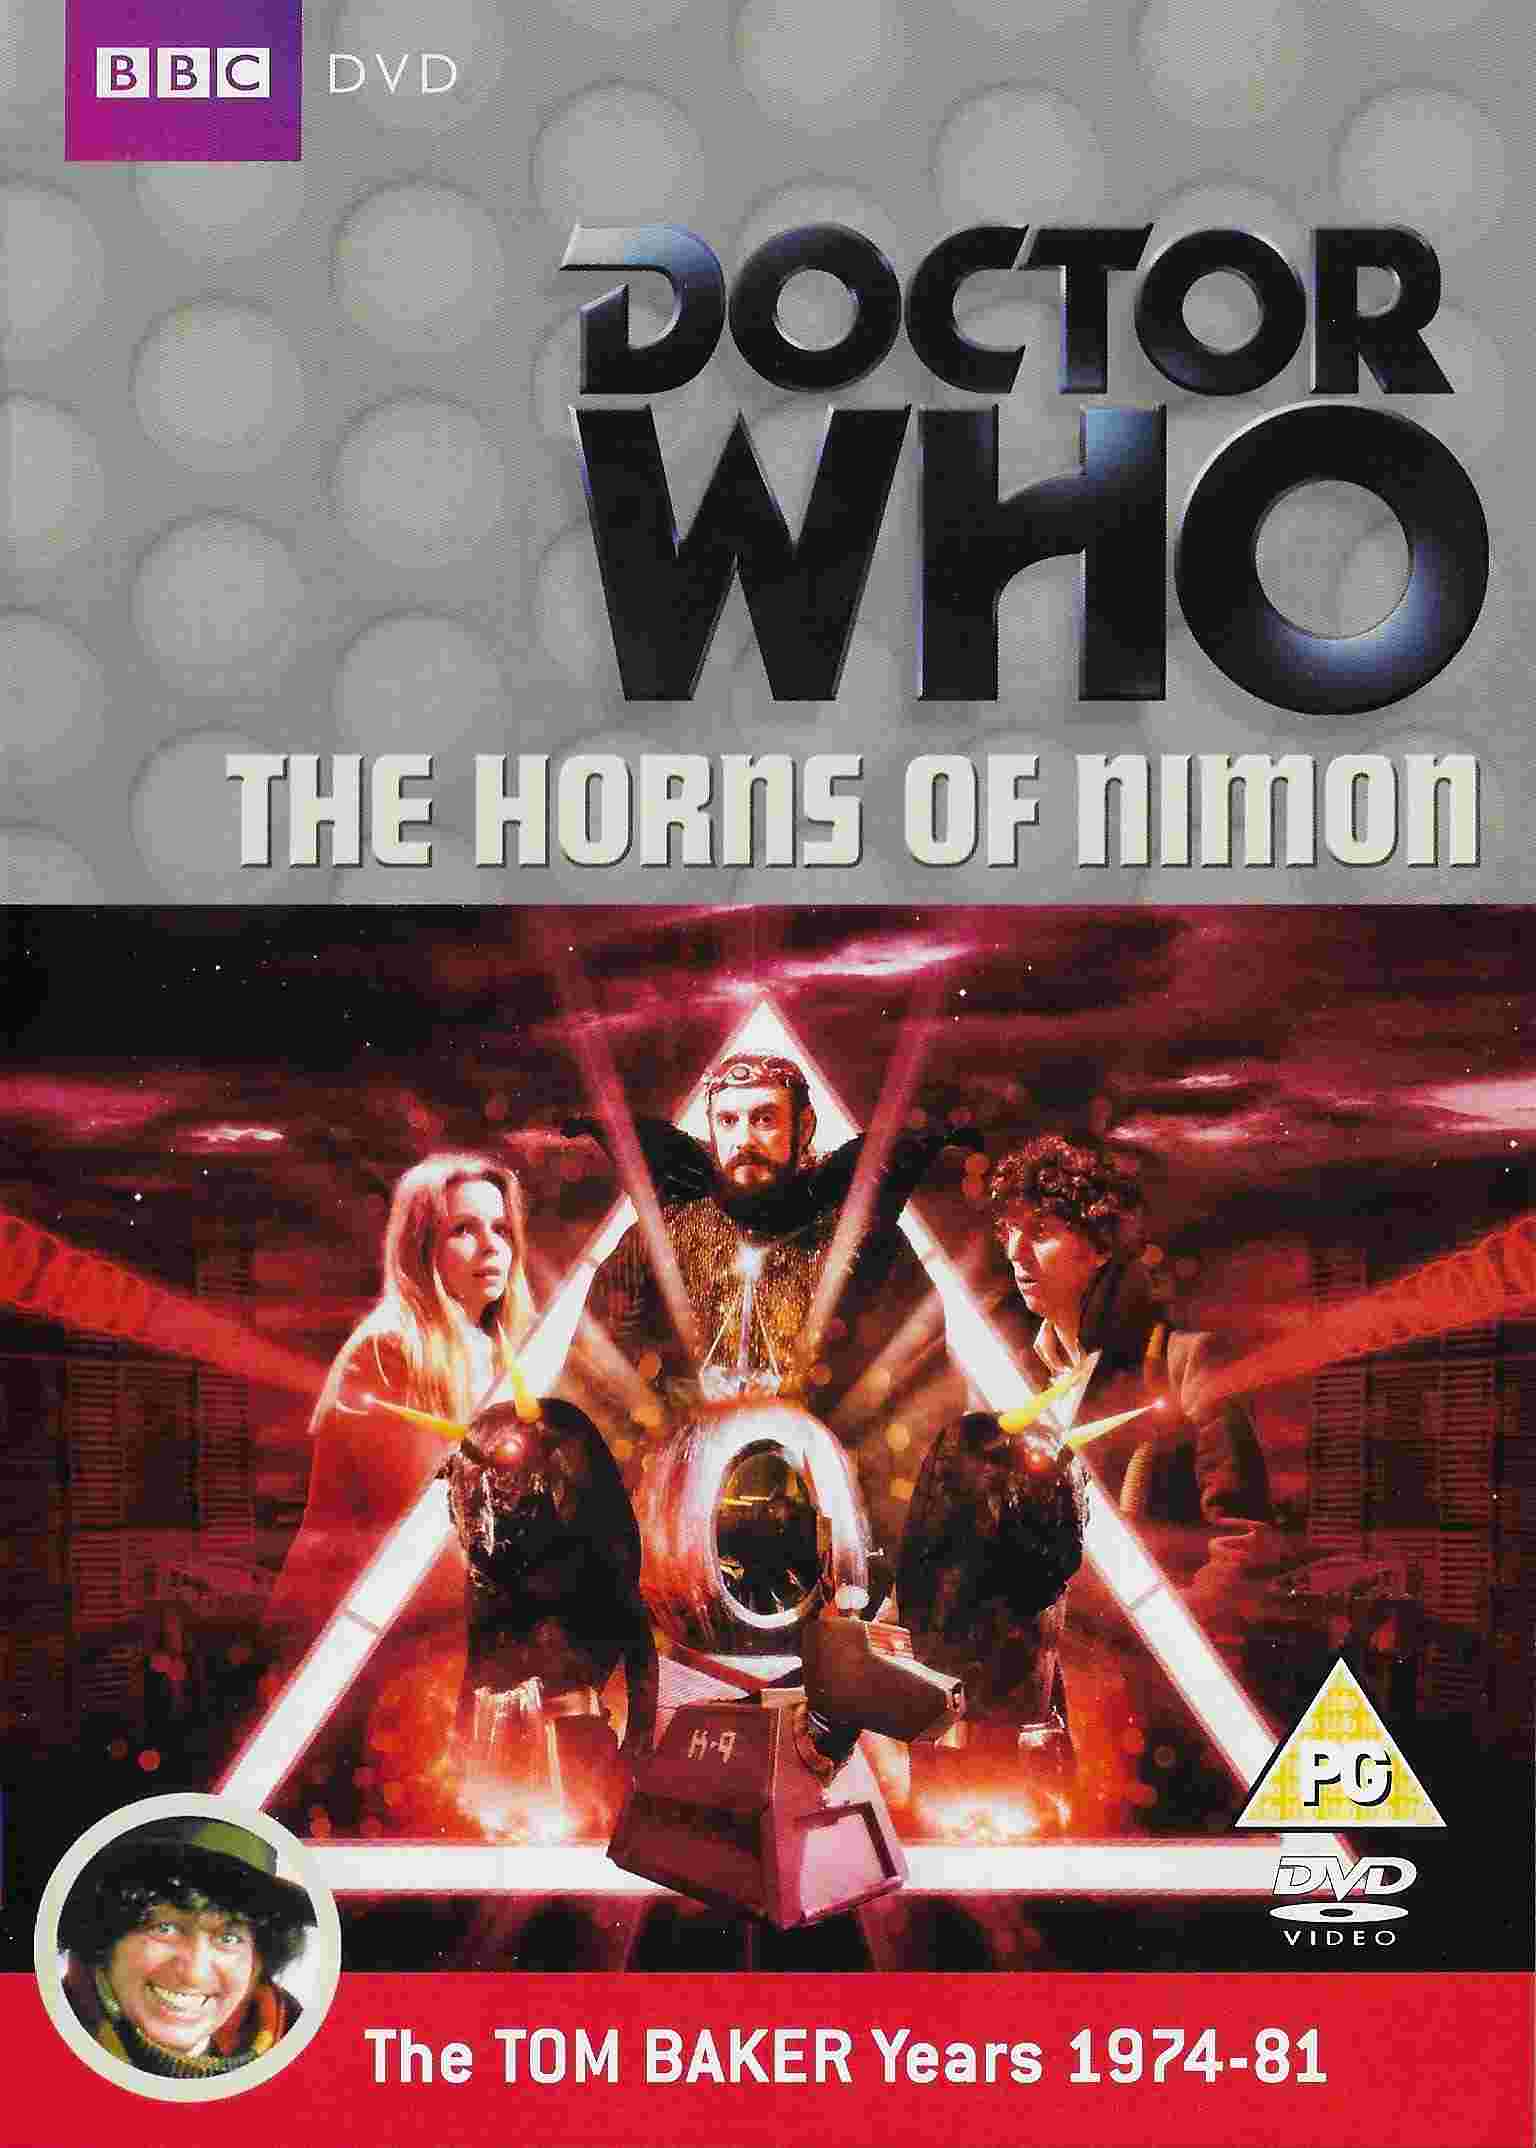 Picture of BBCDVD 2851C Doctor Who - The horns of Nimon by artist Anthony Read from the BBC records and Tapes library